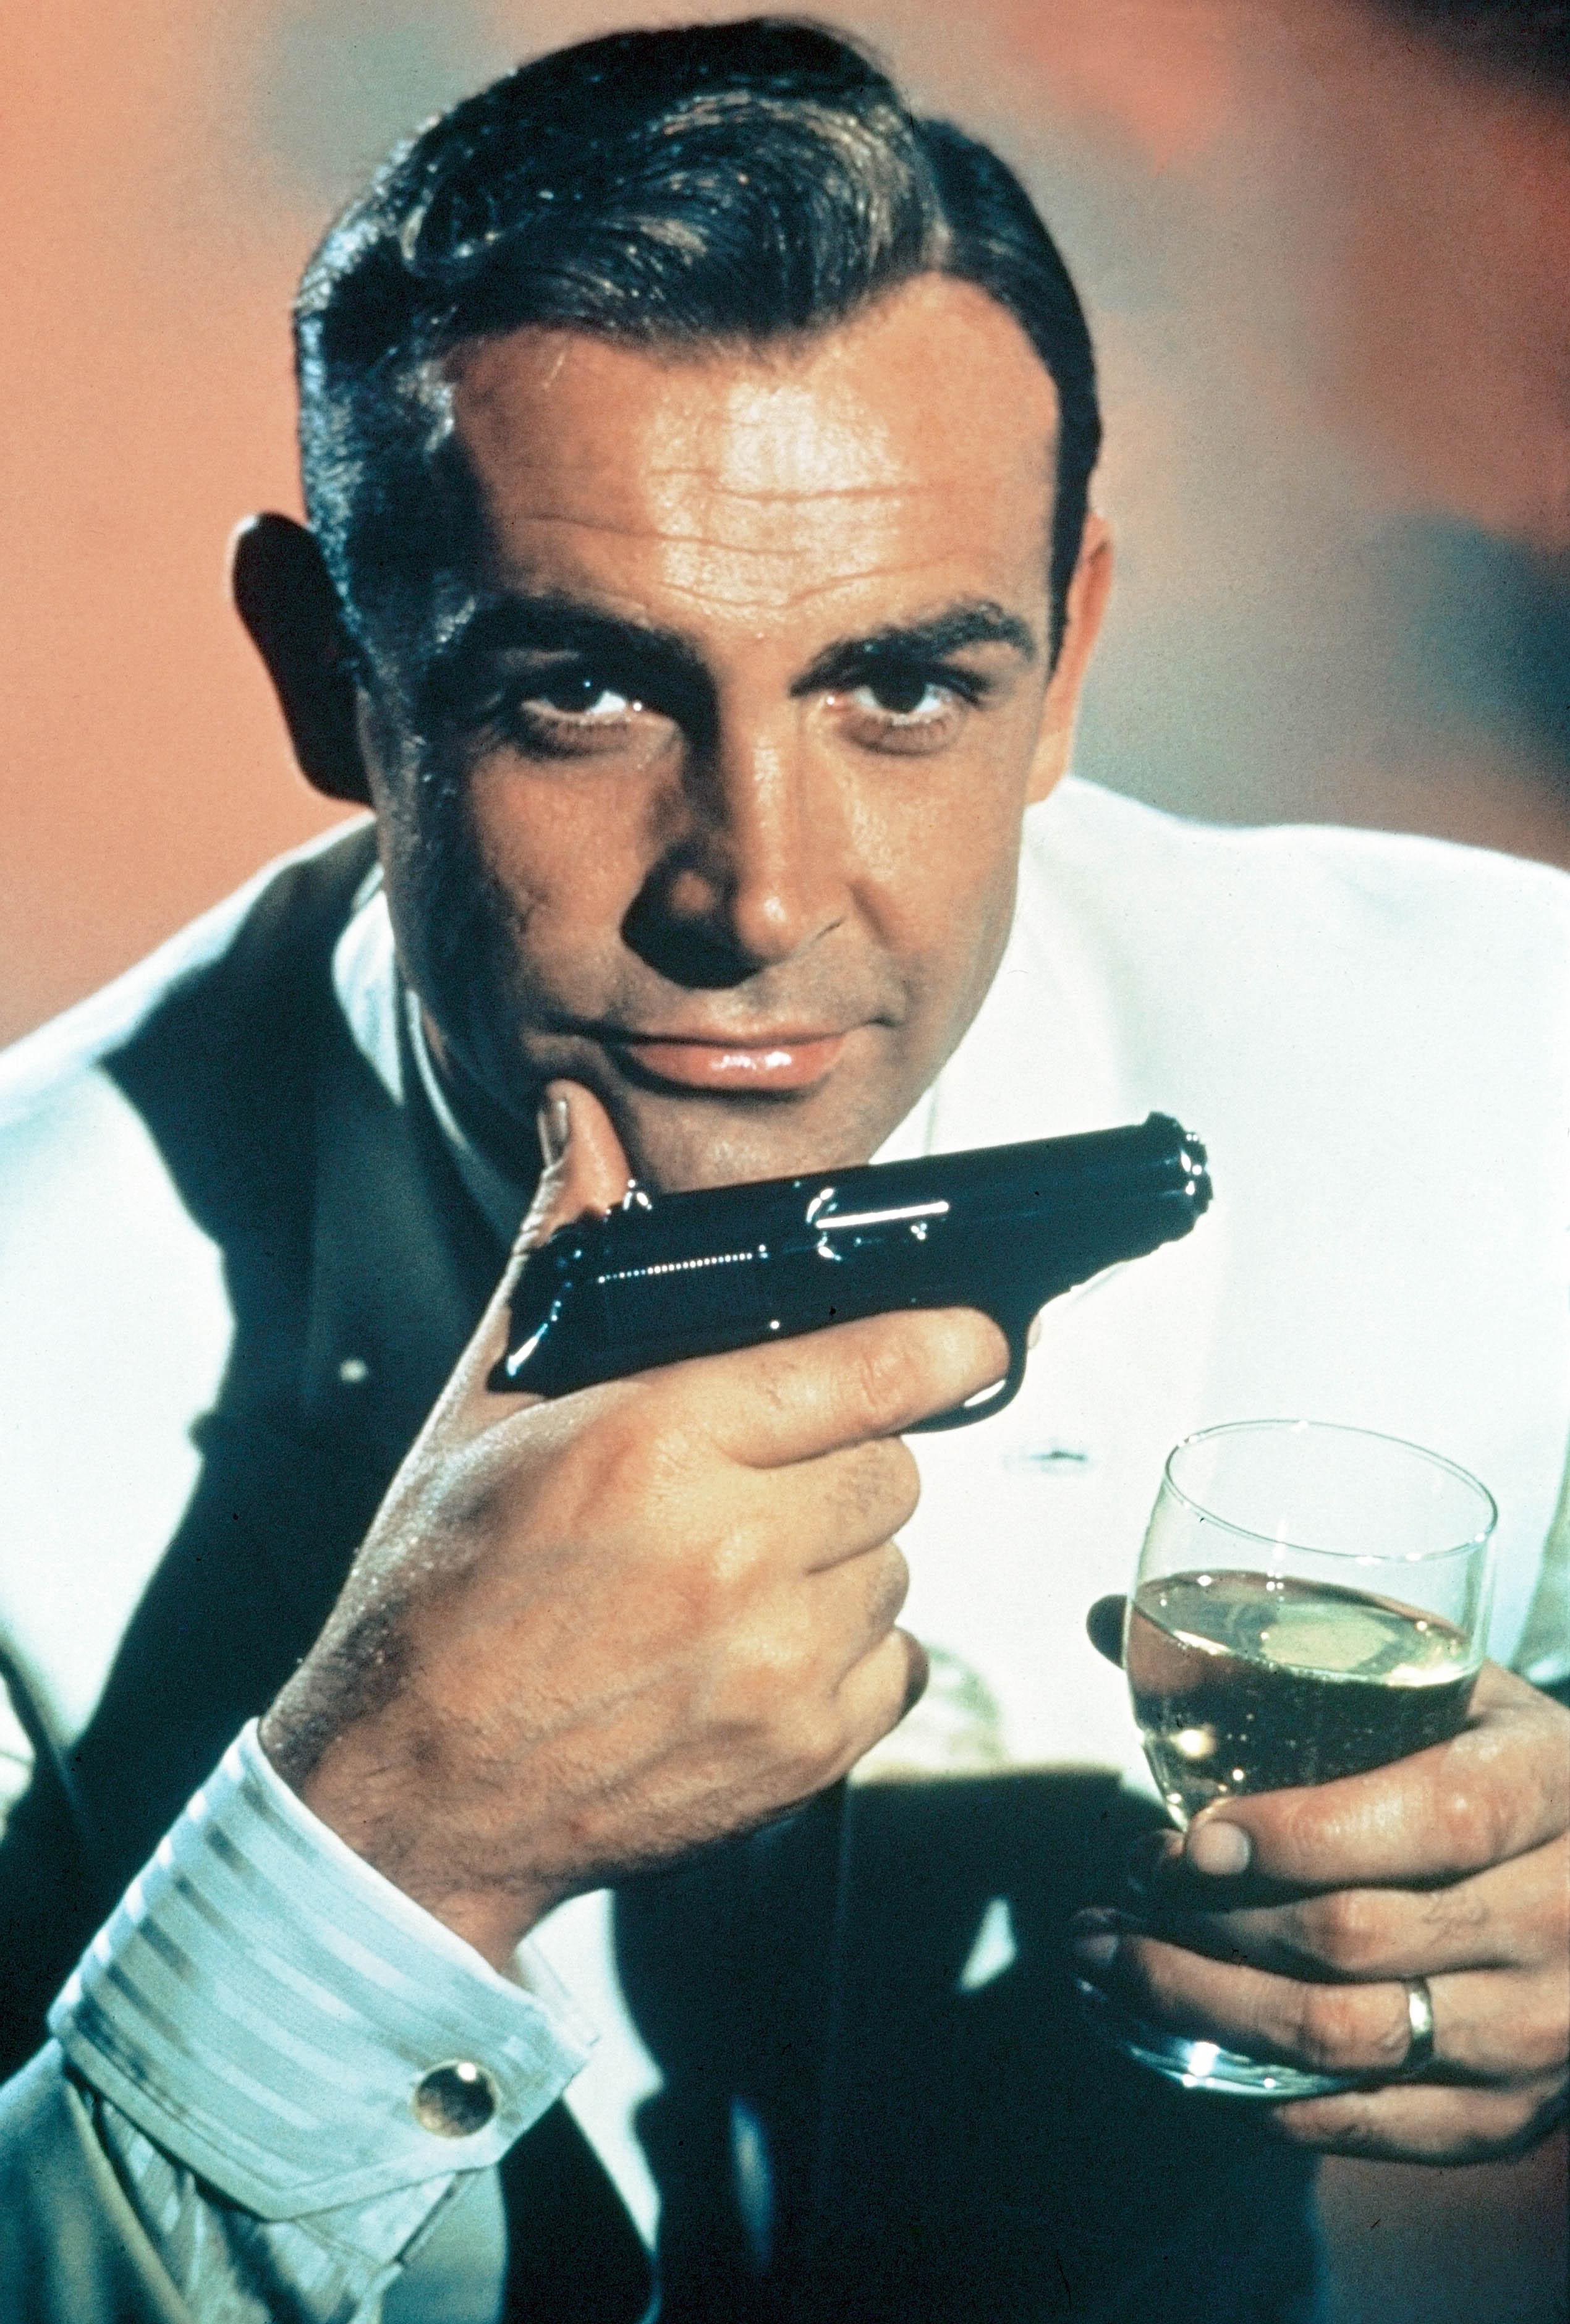 Sean Connery Biography & Wallpaper. Top and Famous Celebrity